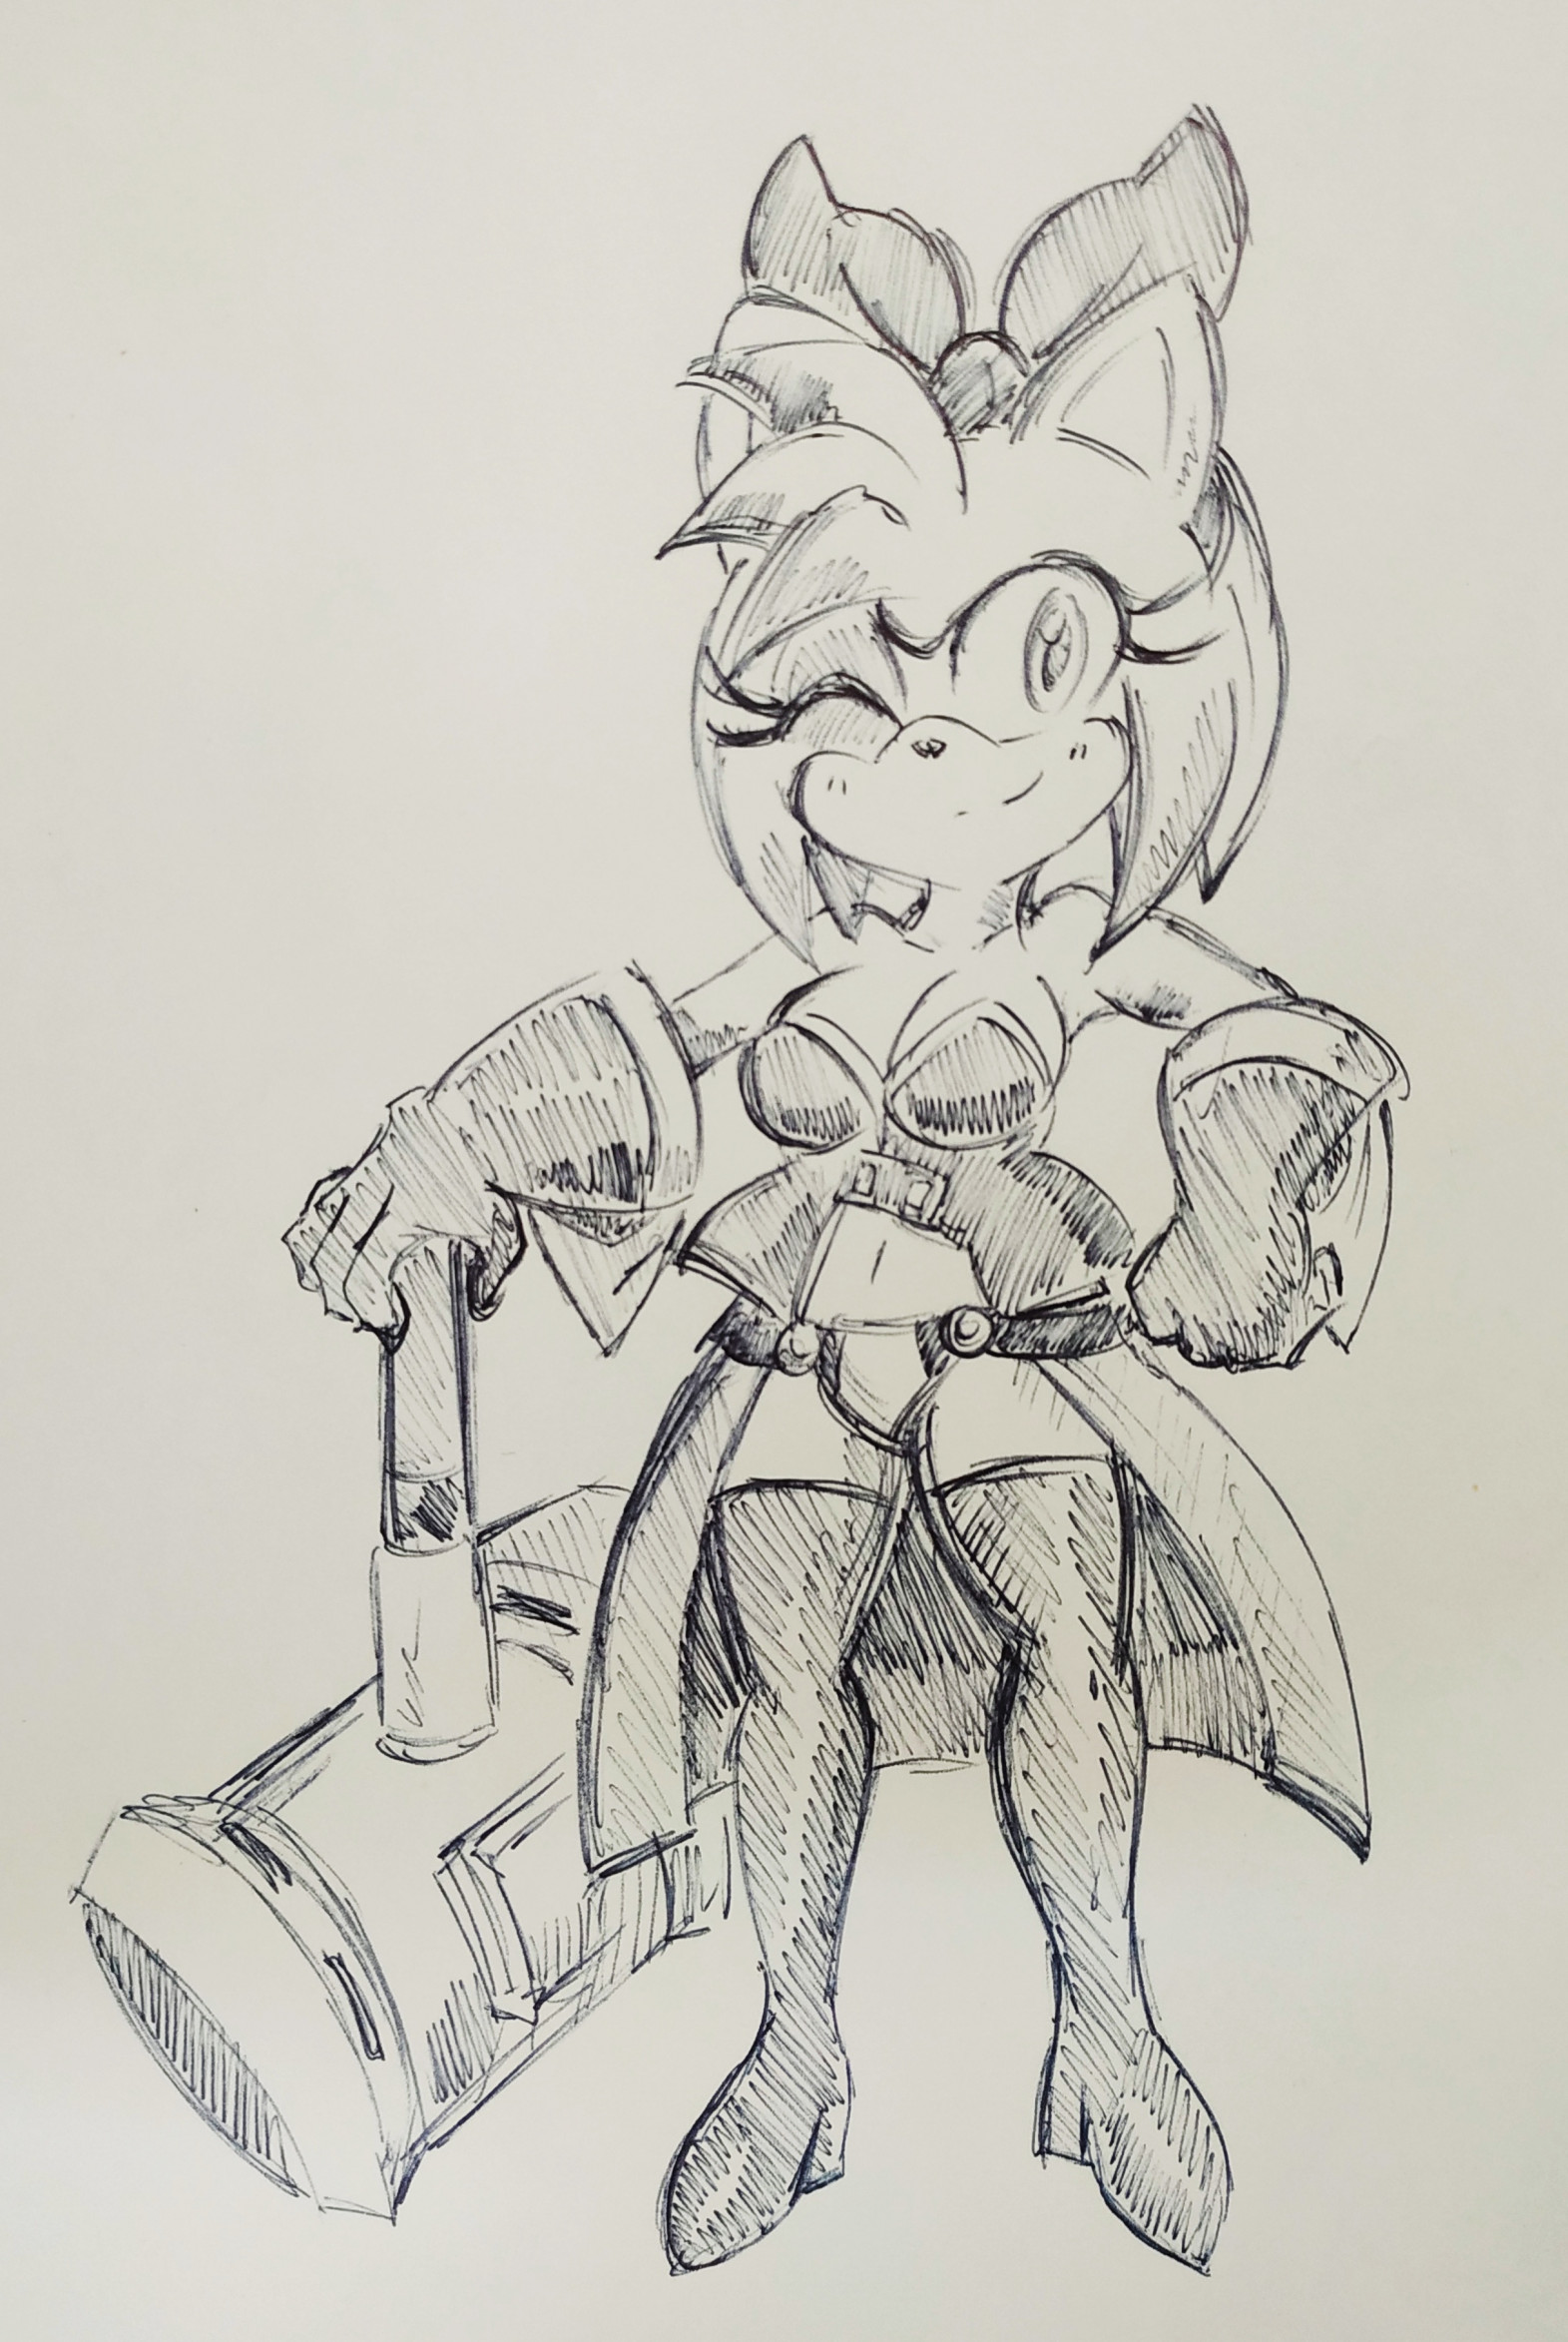 sonic the hedgehog, amy rose, and dark sonic (sonic) drawn by chinchila010